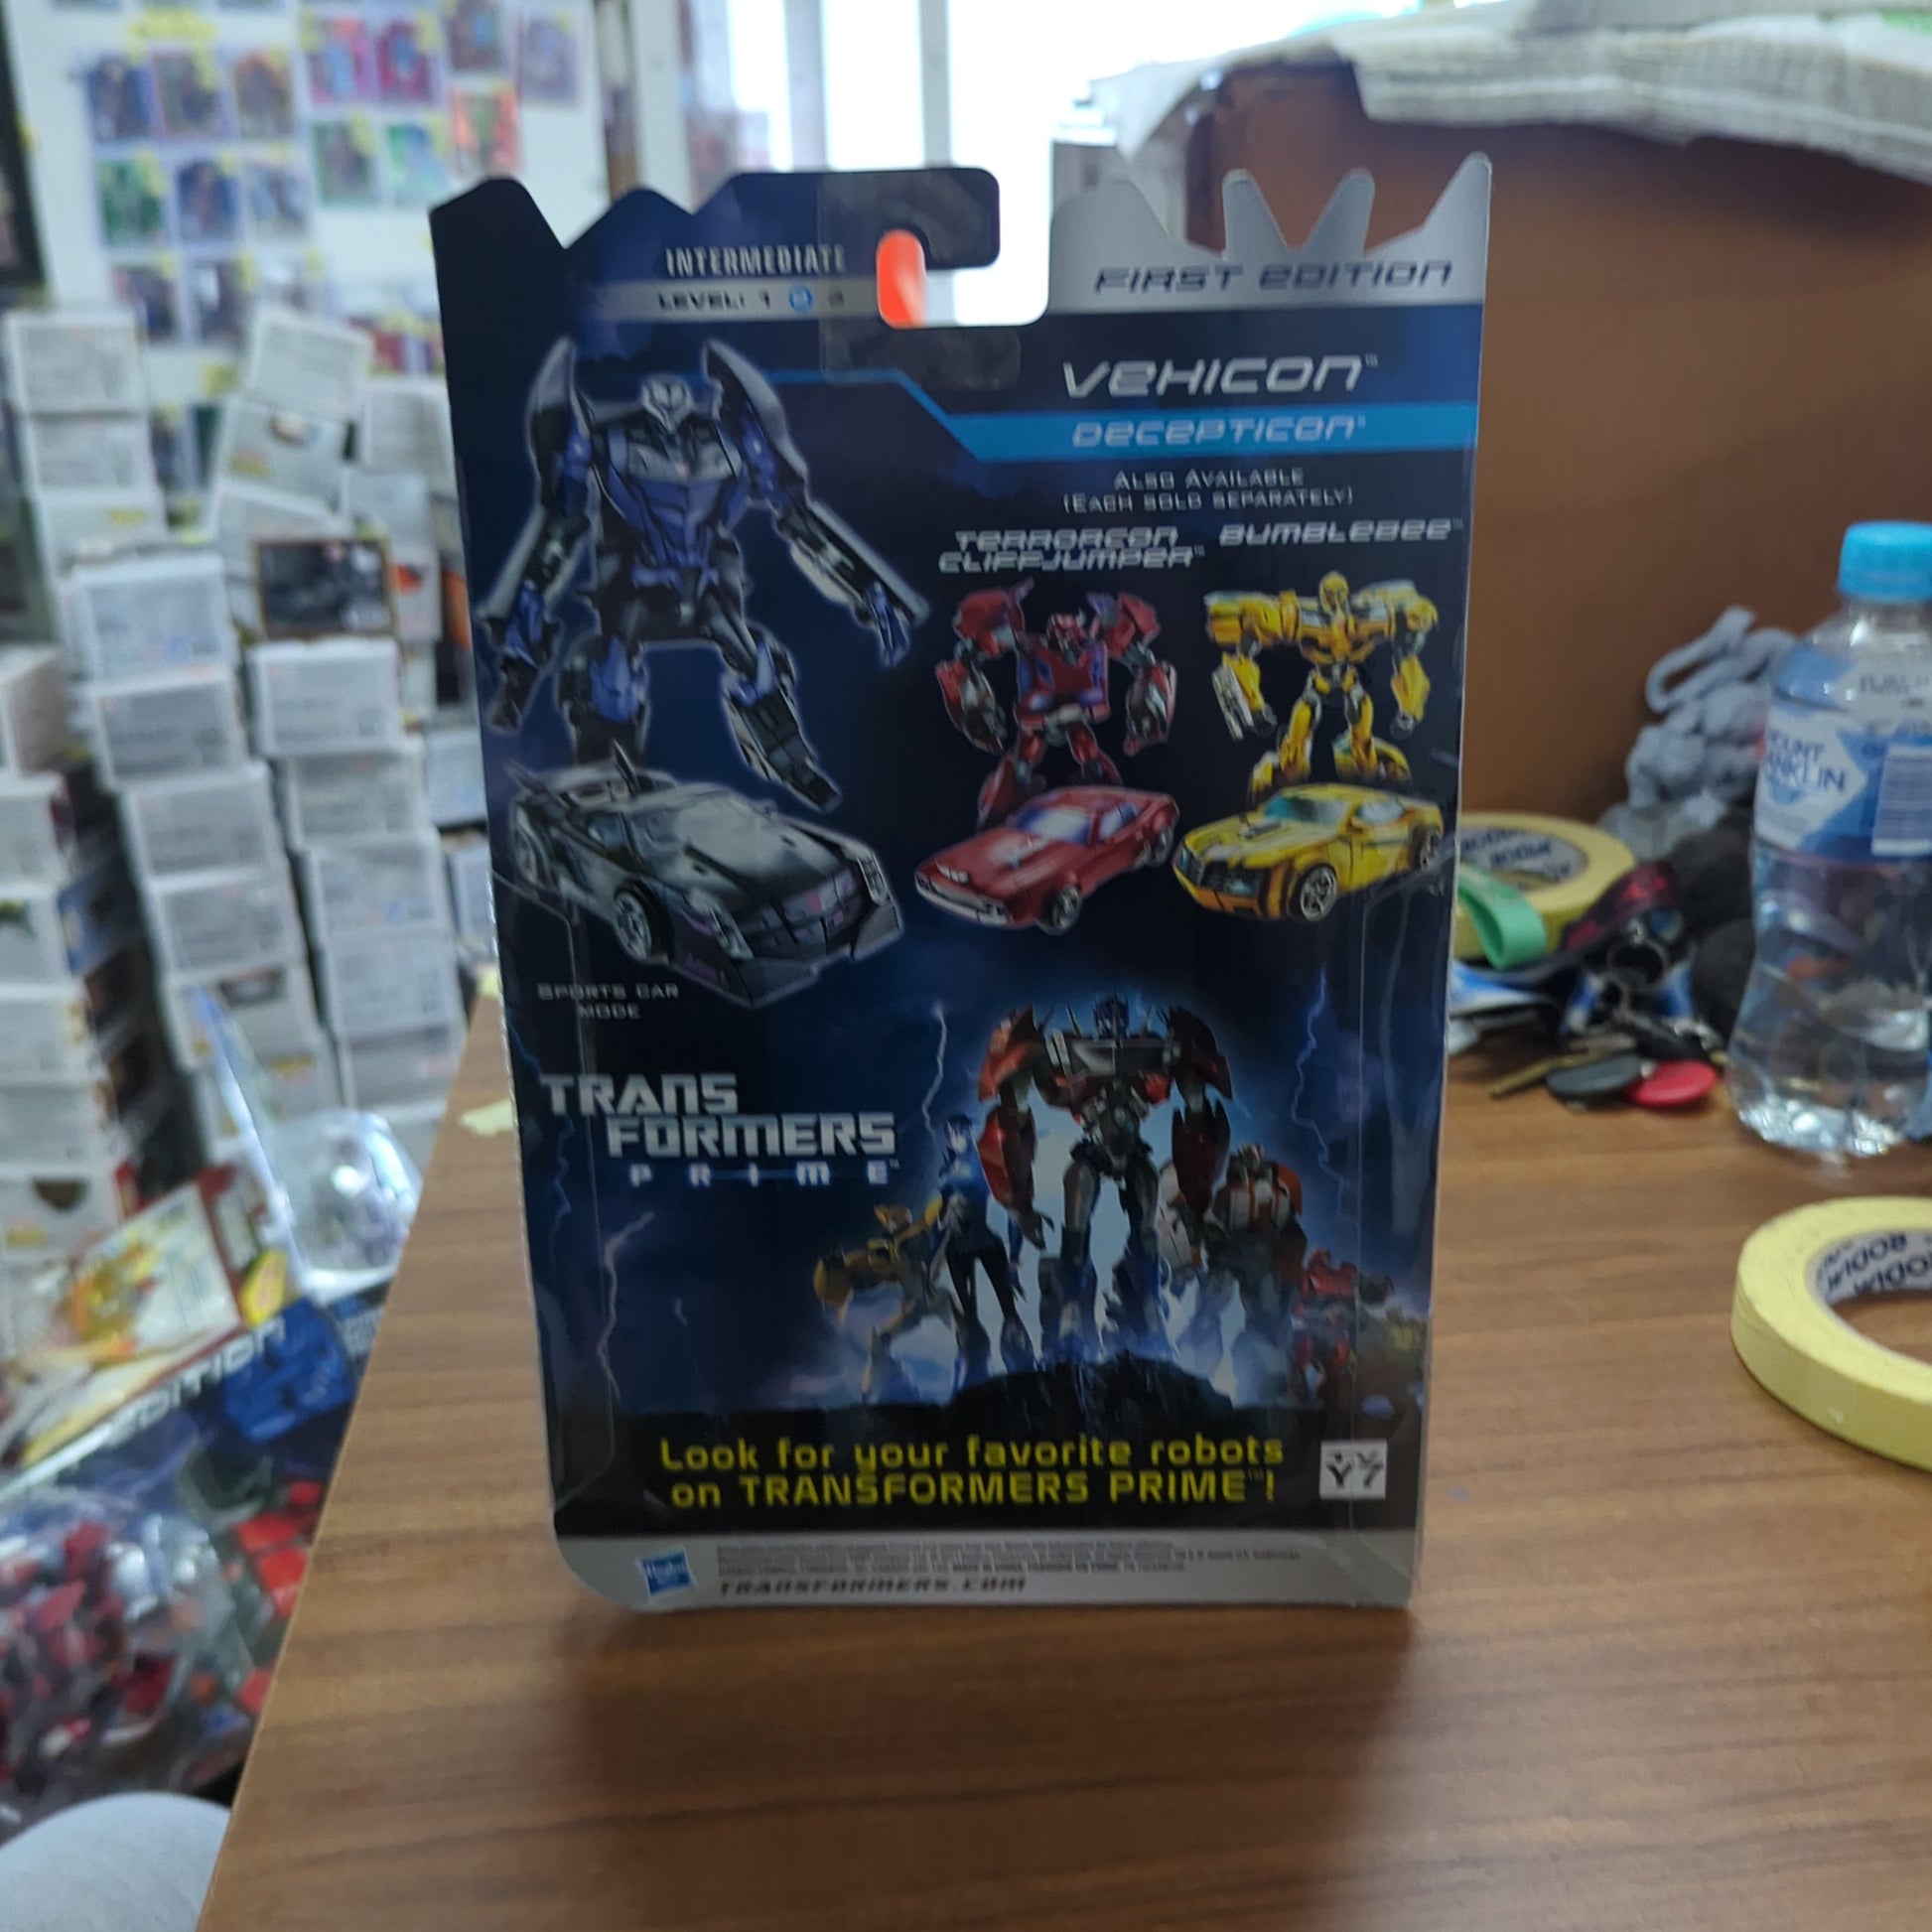 TAKARA Transformers Prime First Edition Deluxe Class VEHICON FRENLY BRICKS - Open 7 Days